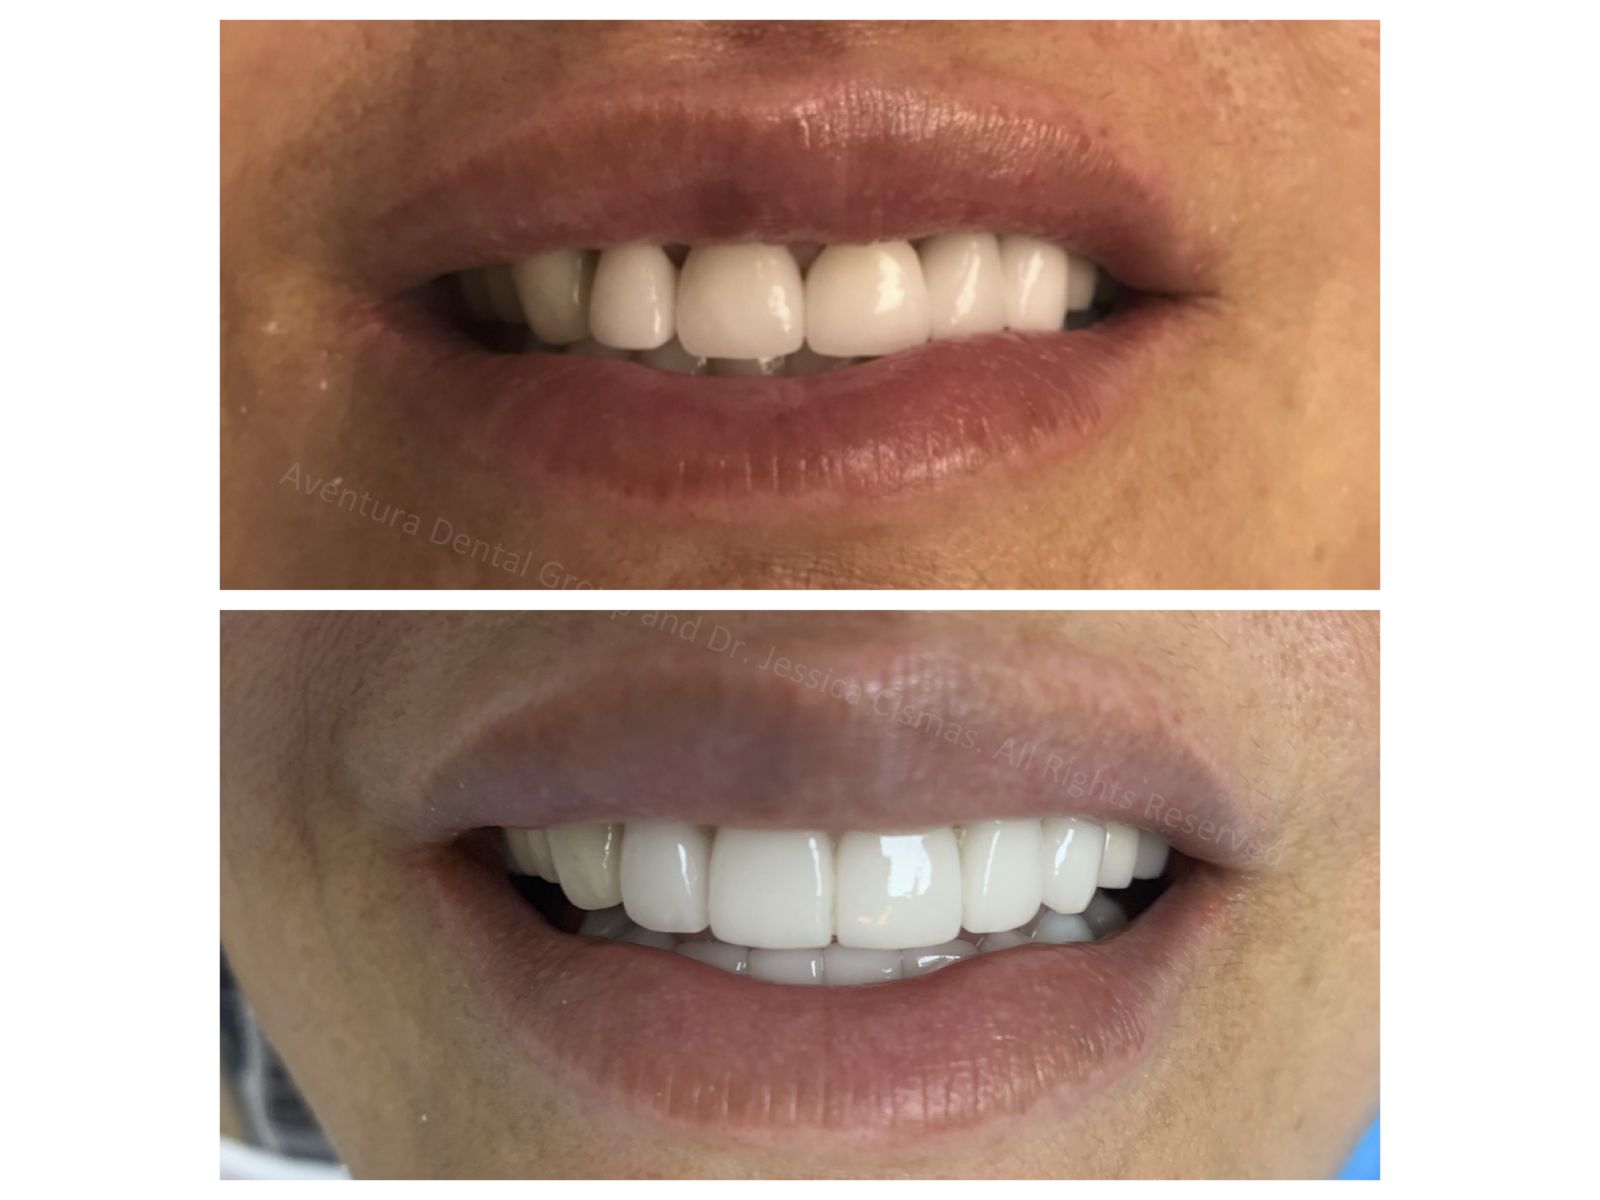 Dr. Jessica Cismas outdid herself again with another full mouth porcelain veneer case. She created a long lasting beautiful smile for this patient who absolutely loved the way her teeth look now. For a limited time Dr. Jessica Cismas will provide cosmetic consultations to the first 50 patients.